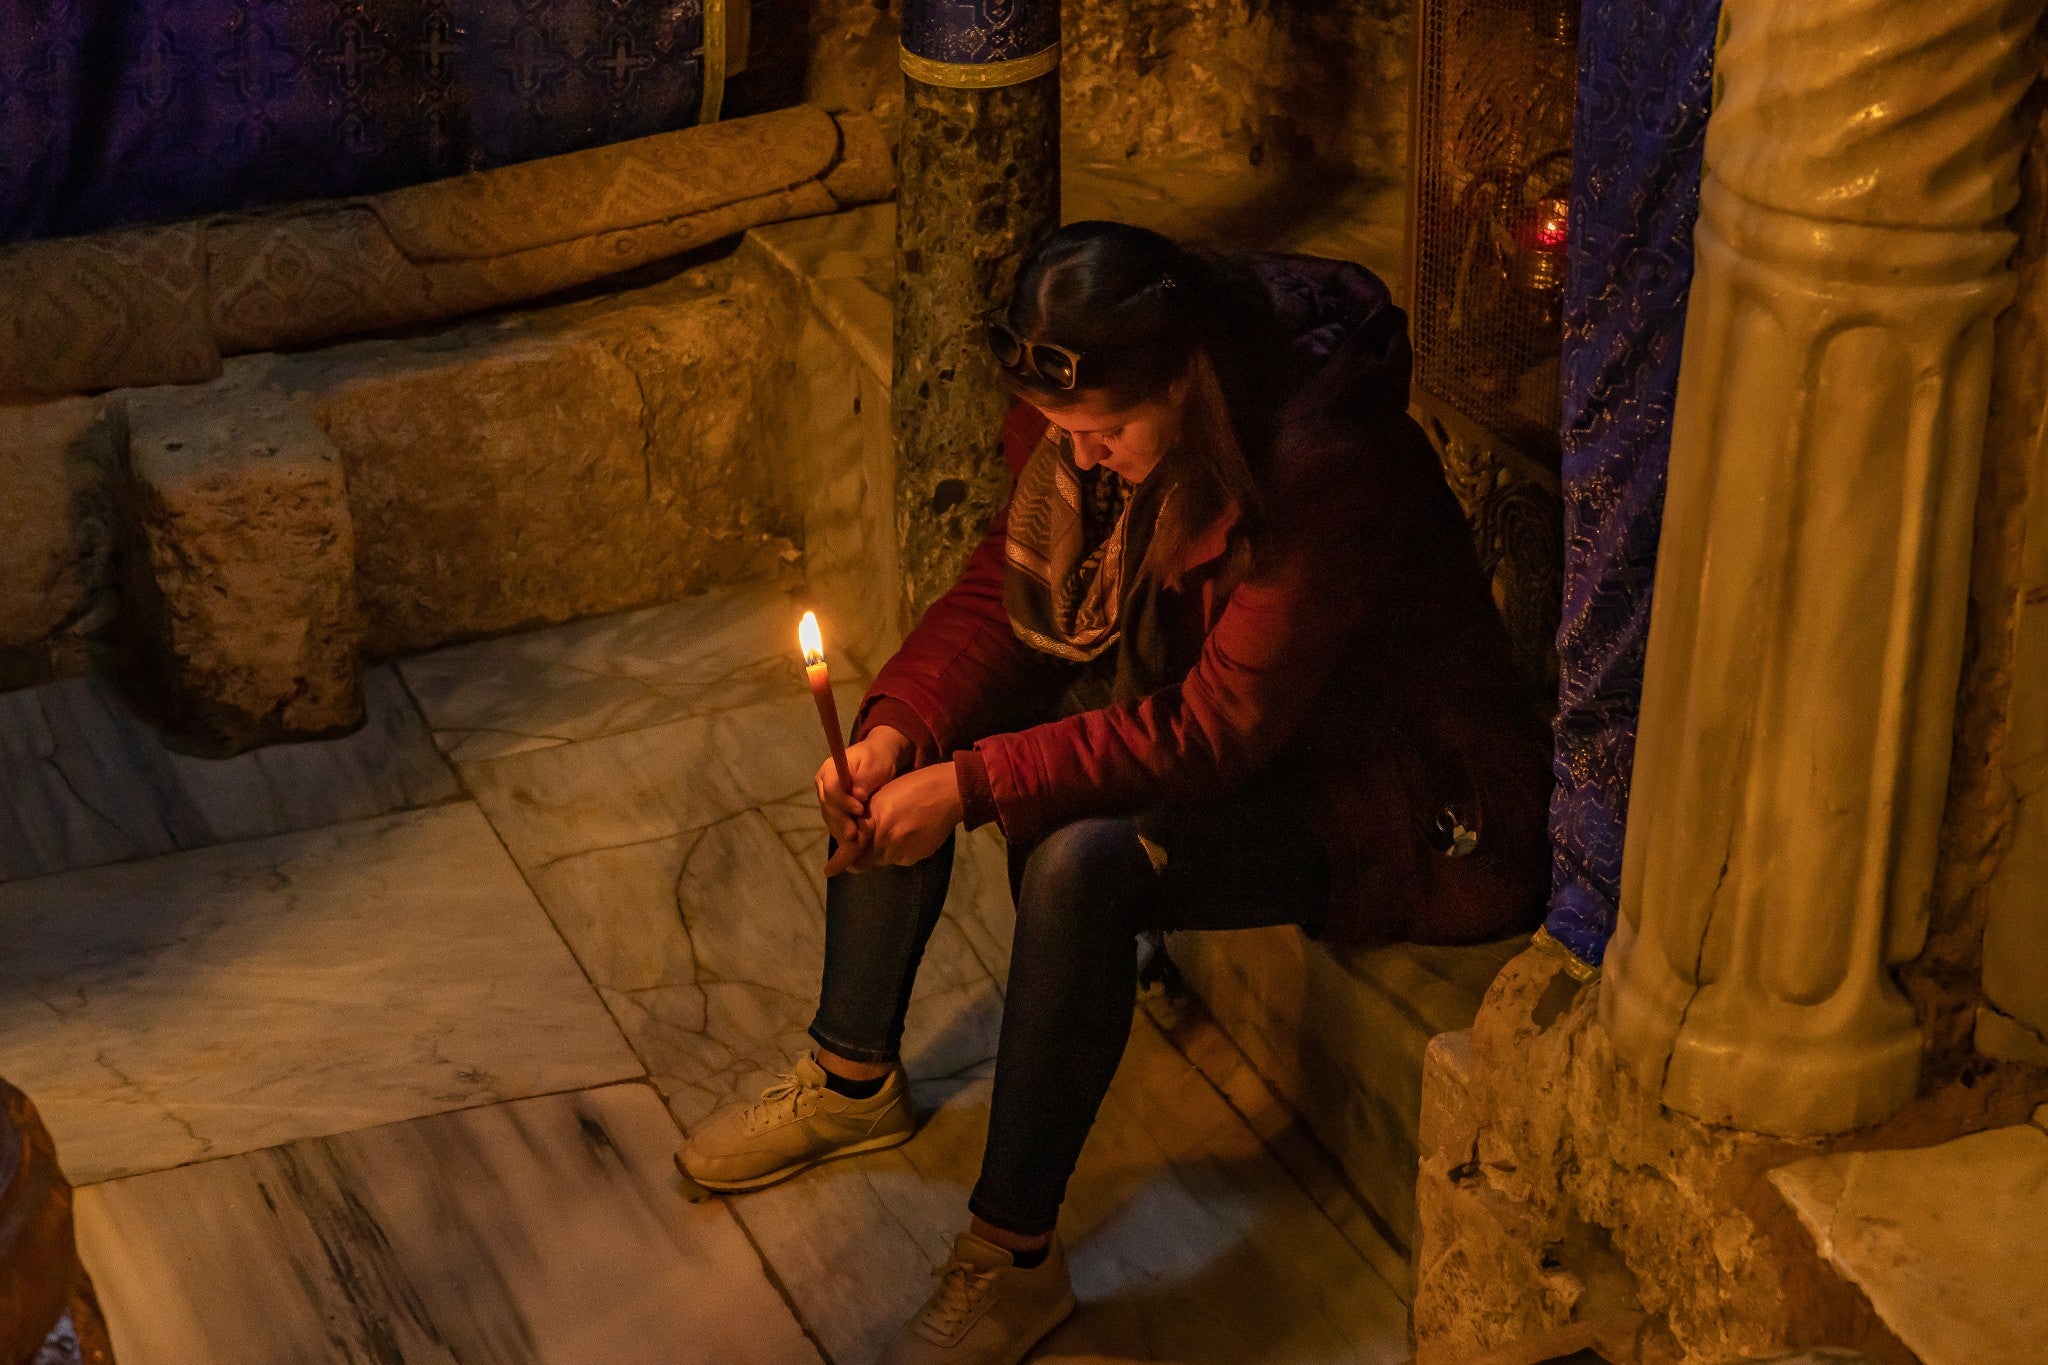 A worshipper prays for peace at the grotto inside the Church of the Nativity